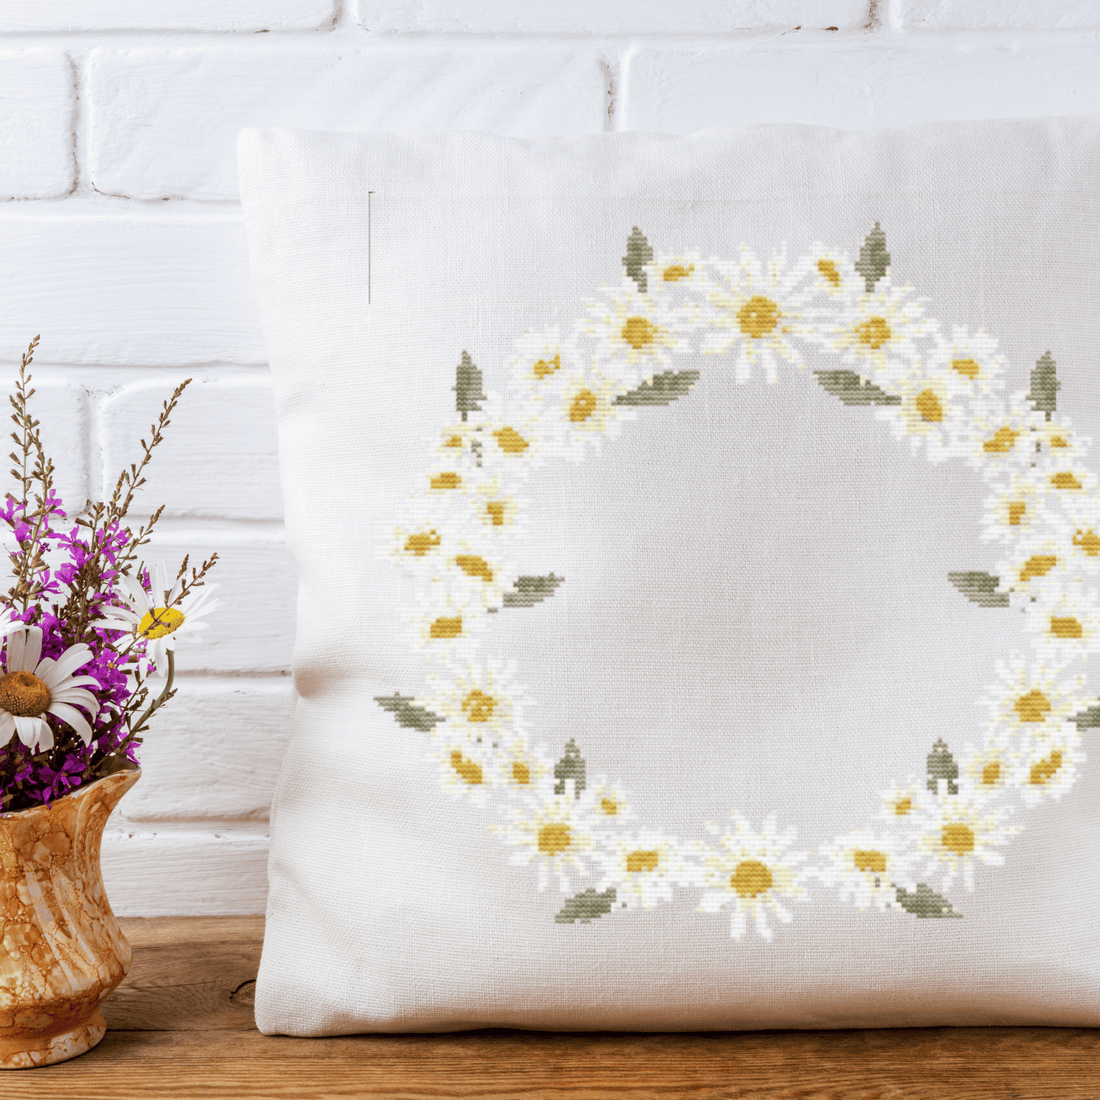 How to Embroider Cross Stitch Directly Onto Fabric